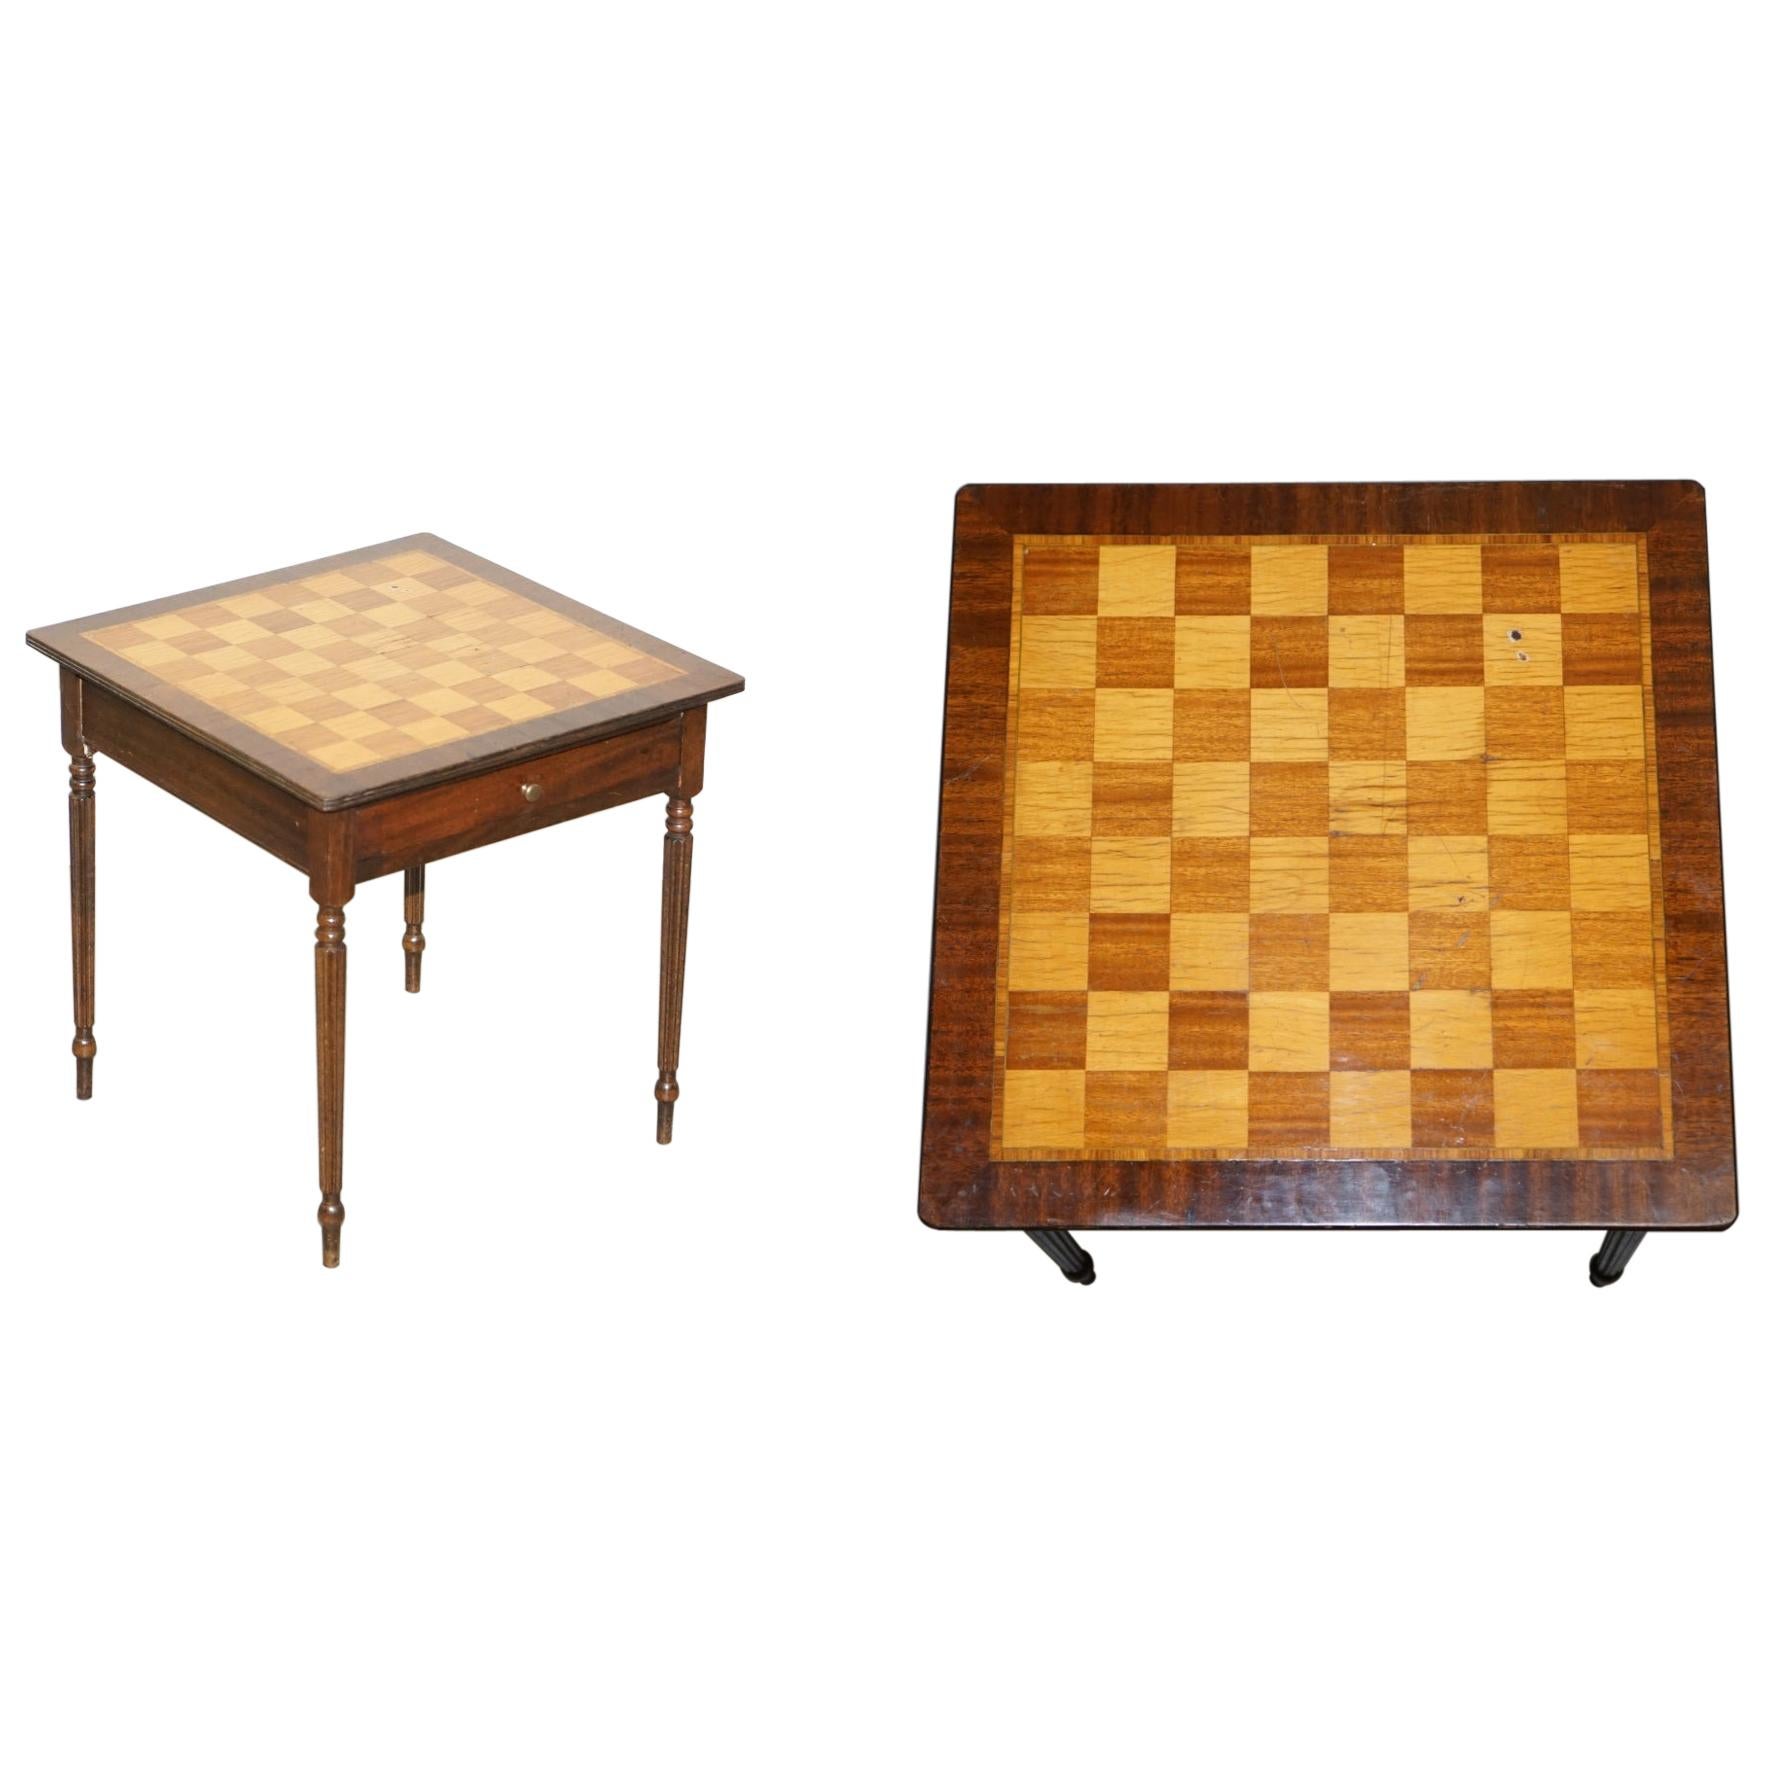 Vintage Walnut & Hardwood Marquetry Inlaid Chess Board Games Table with Drawer